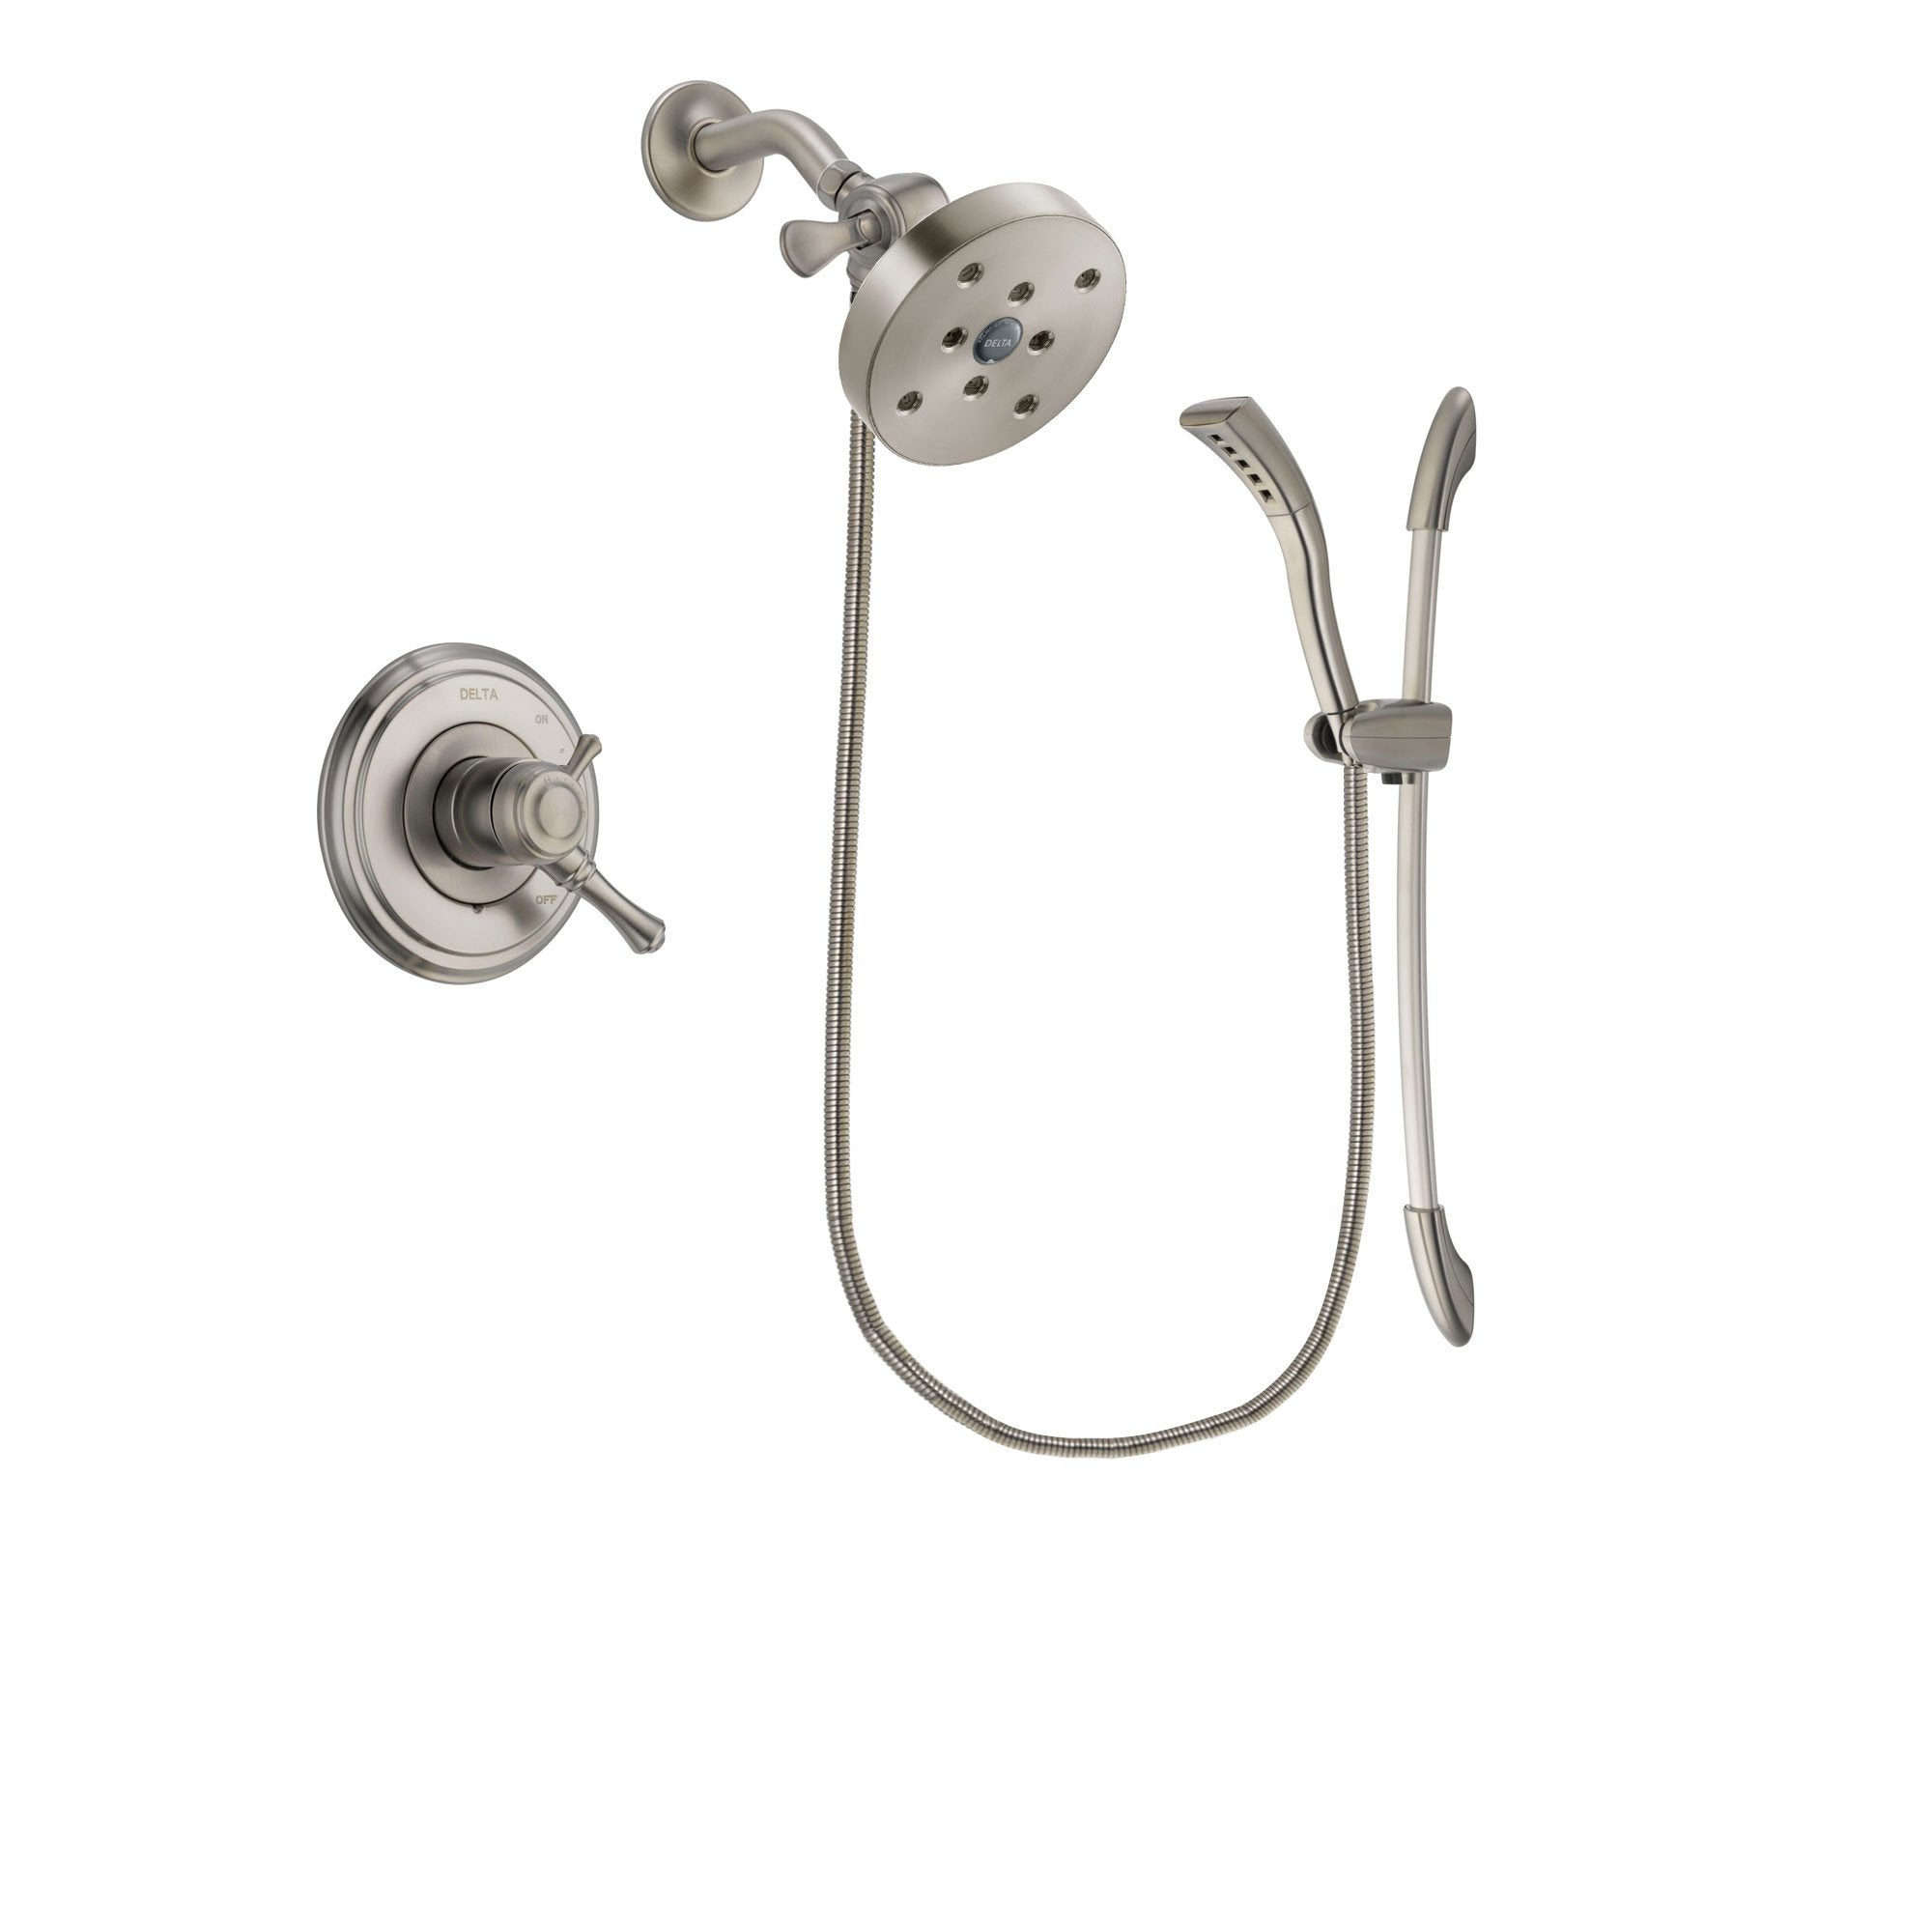 Delta Cassidy Stainless Steel Finish Dual Control Shower Faucet System Package with 5-1/2 inch Shower Head and Handshower with Slide Bar Includes Rough-in Valve DSP1512V